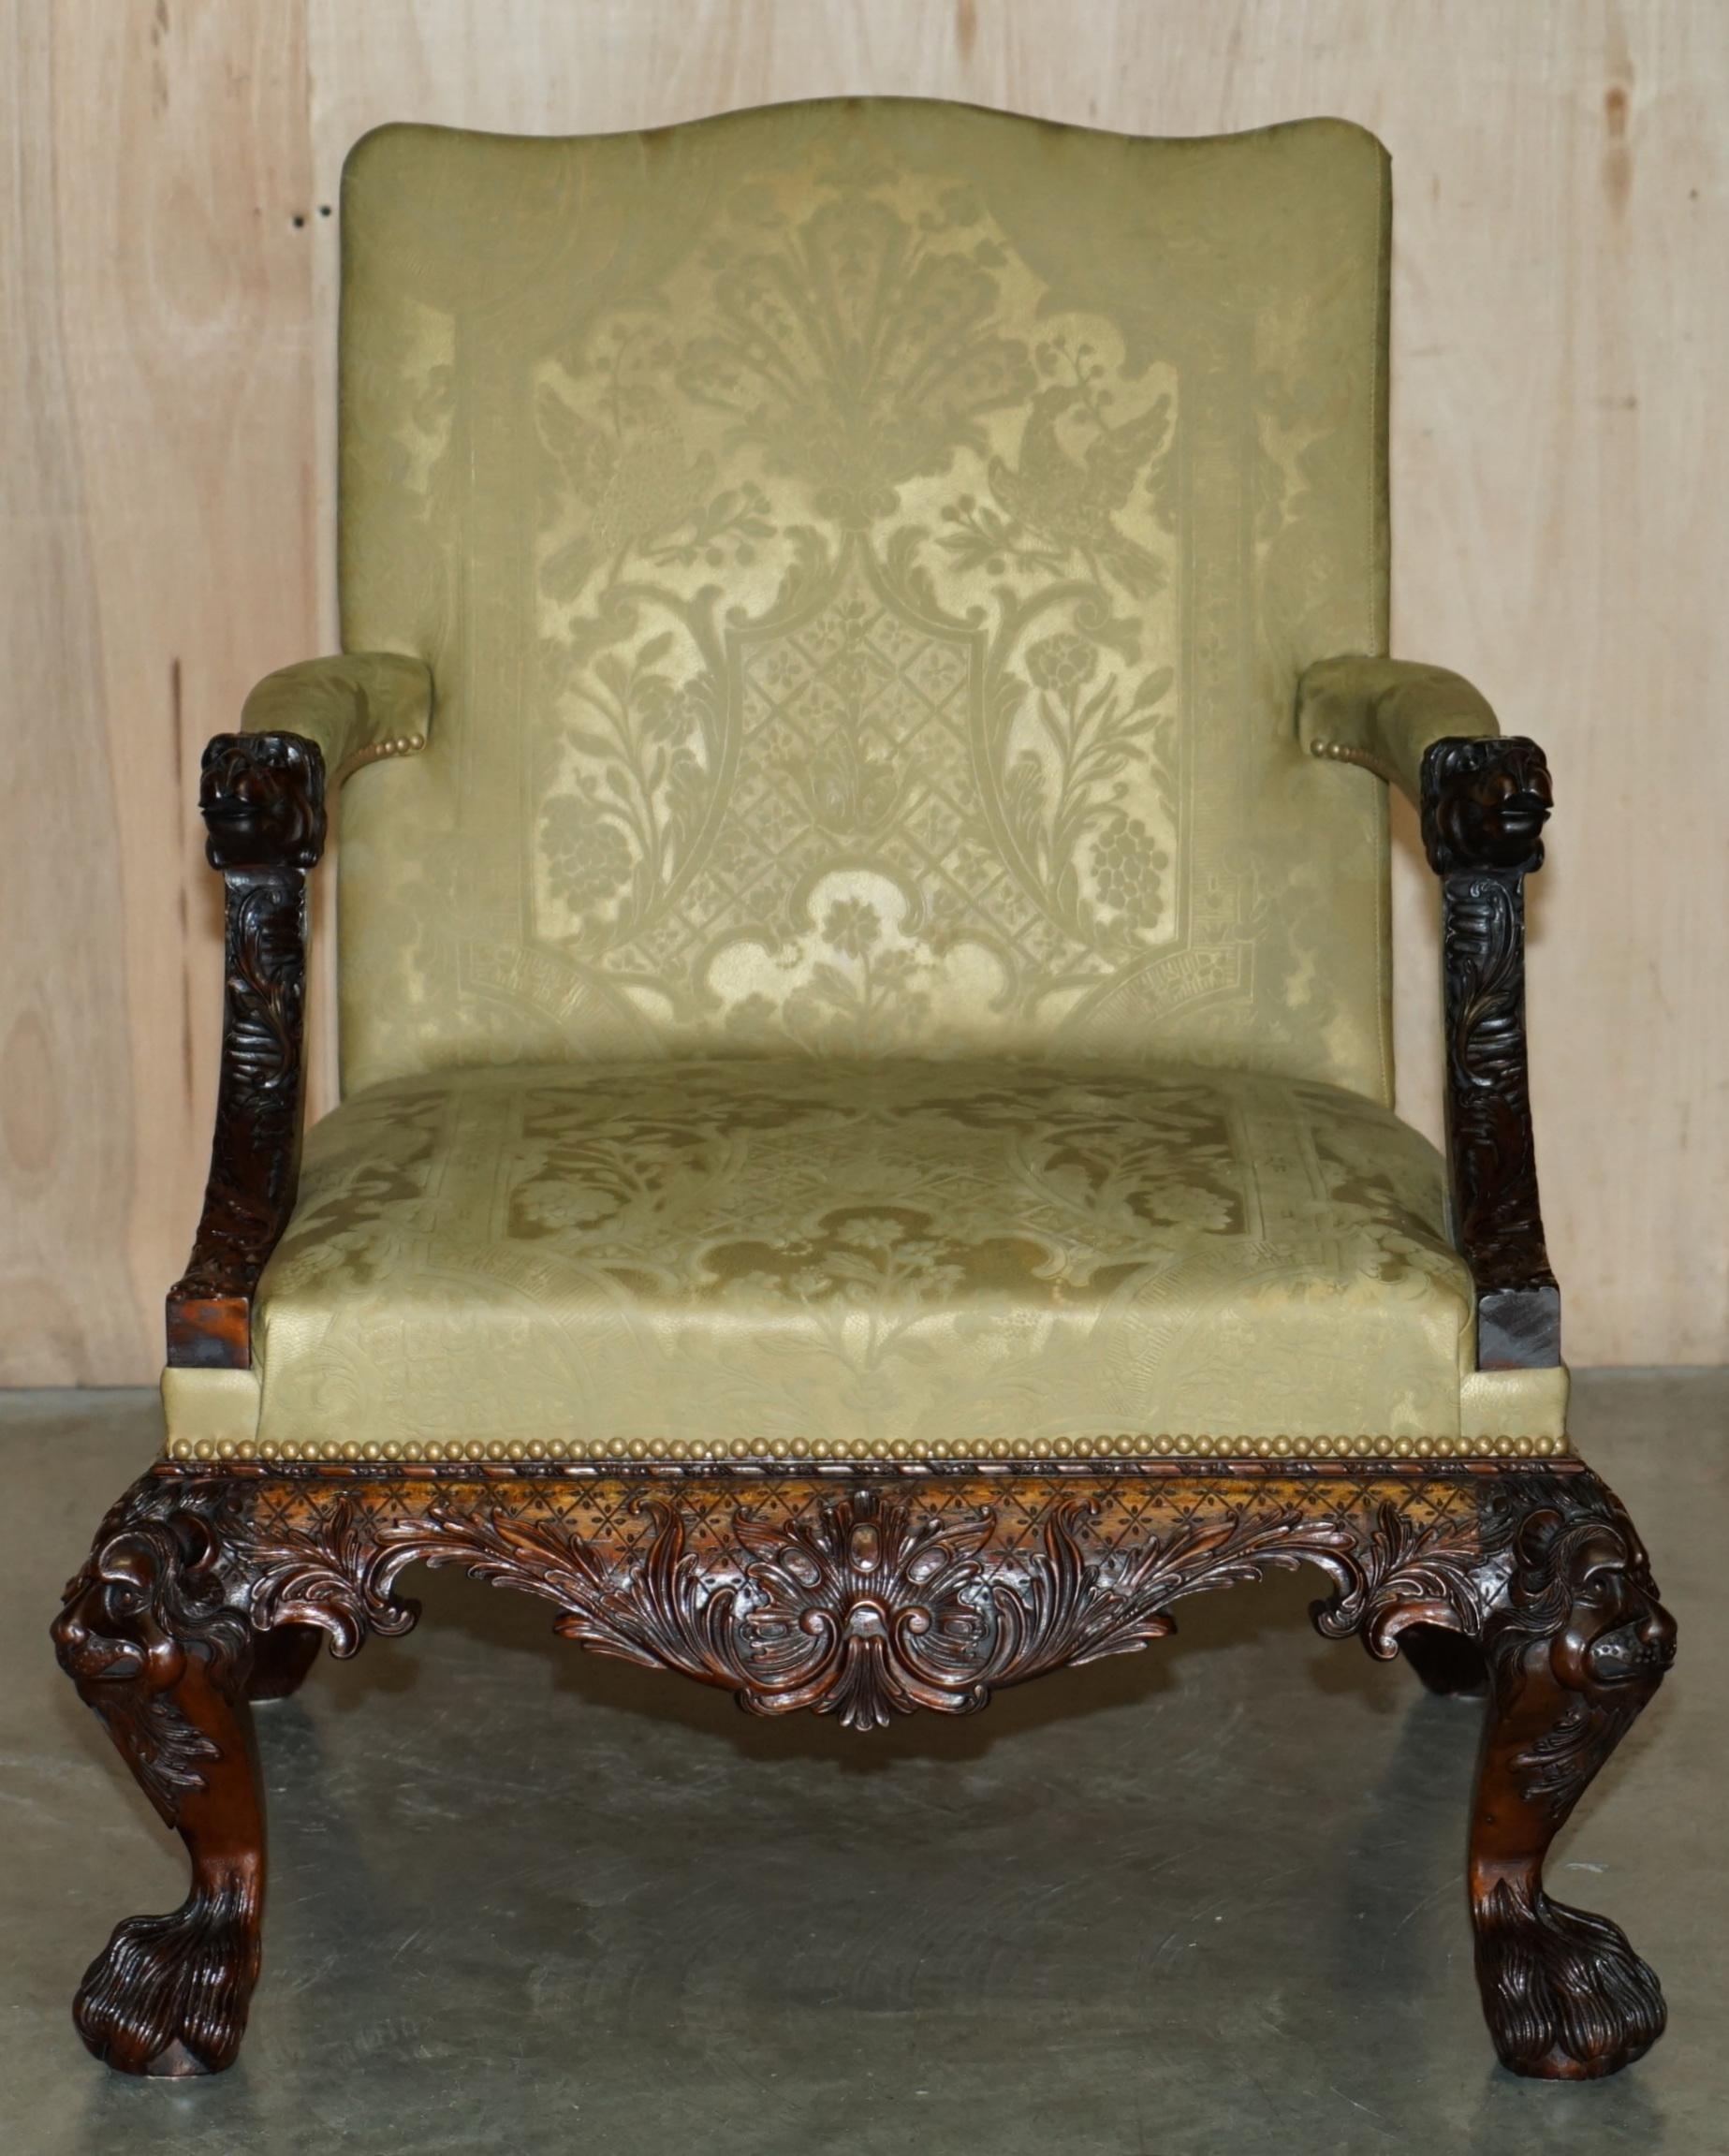 FINE PAiR OF LARGE CARved GAINSBOROUGH ARMCHAIRS AFTER GILES GRENDEY 1693-1780 im Angebot 13